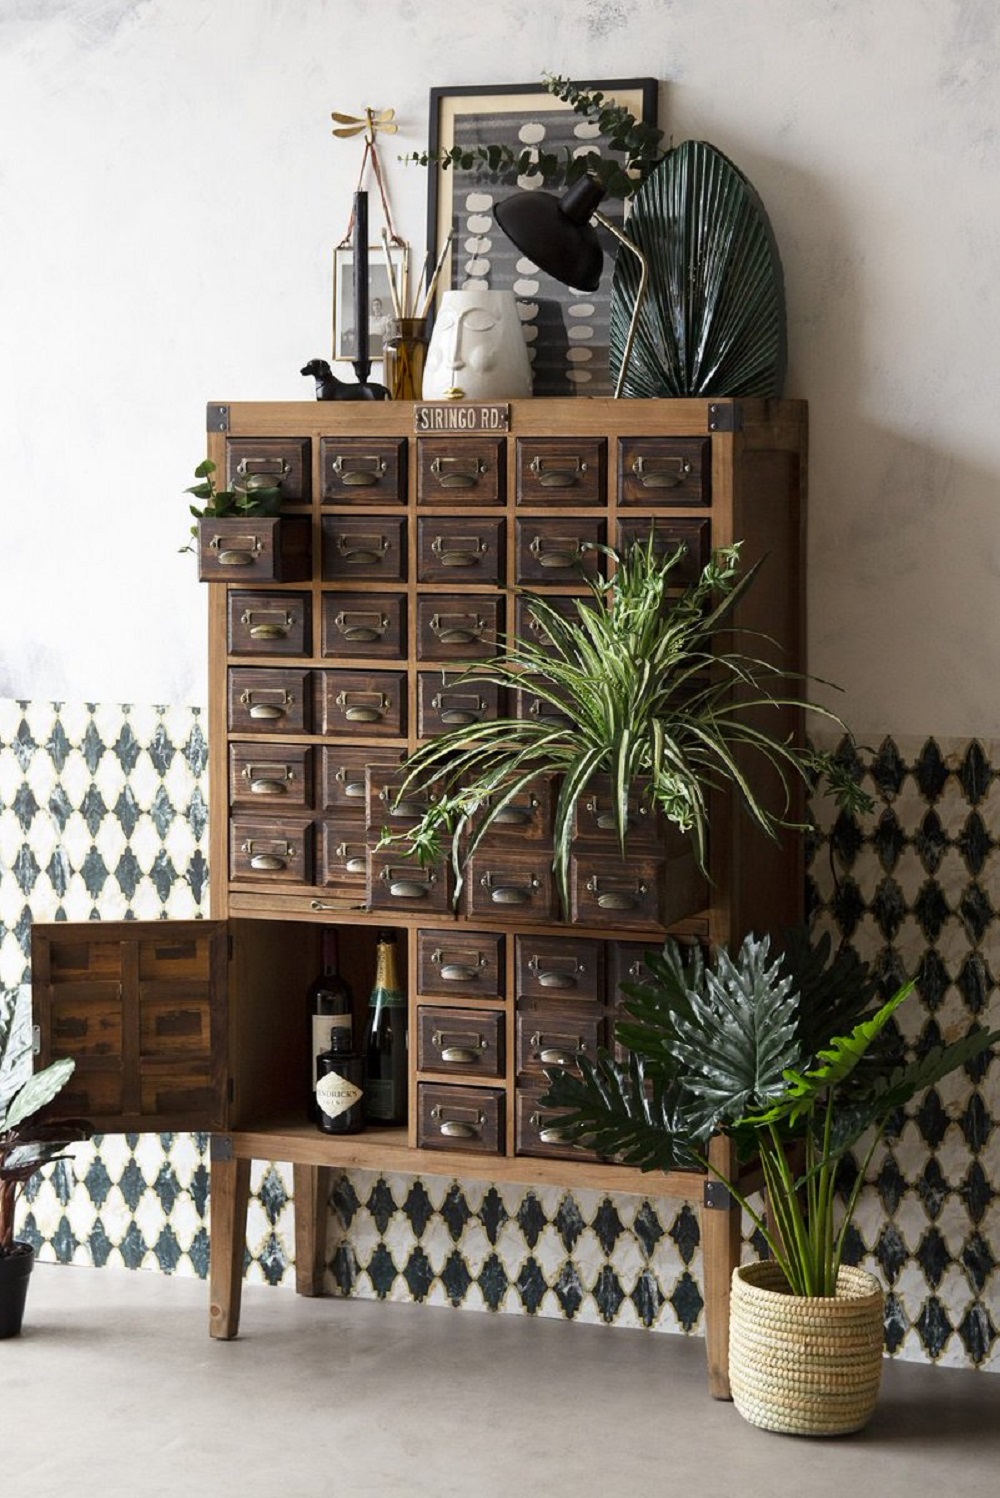 t3-66 How to use a vintage apothecary cabinet in your home décor